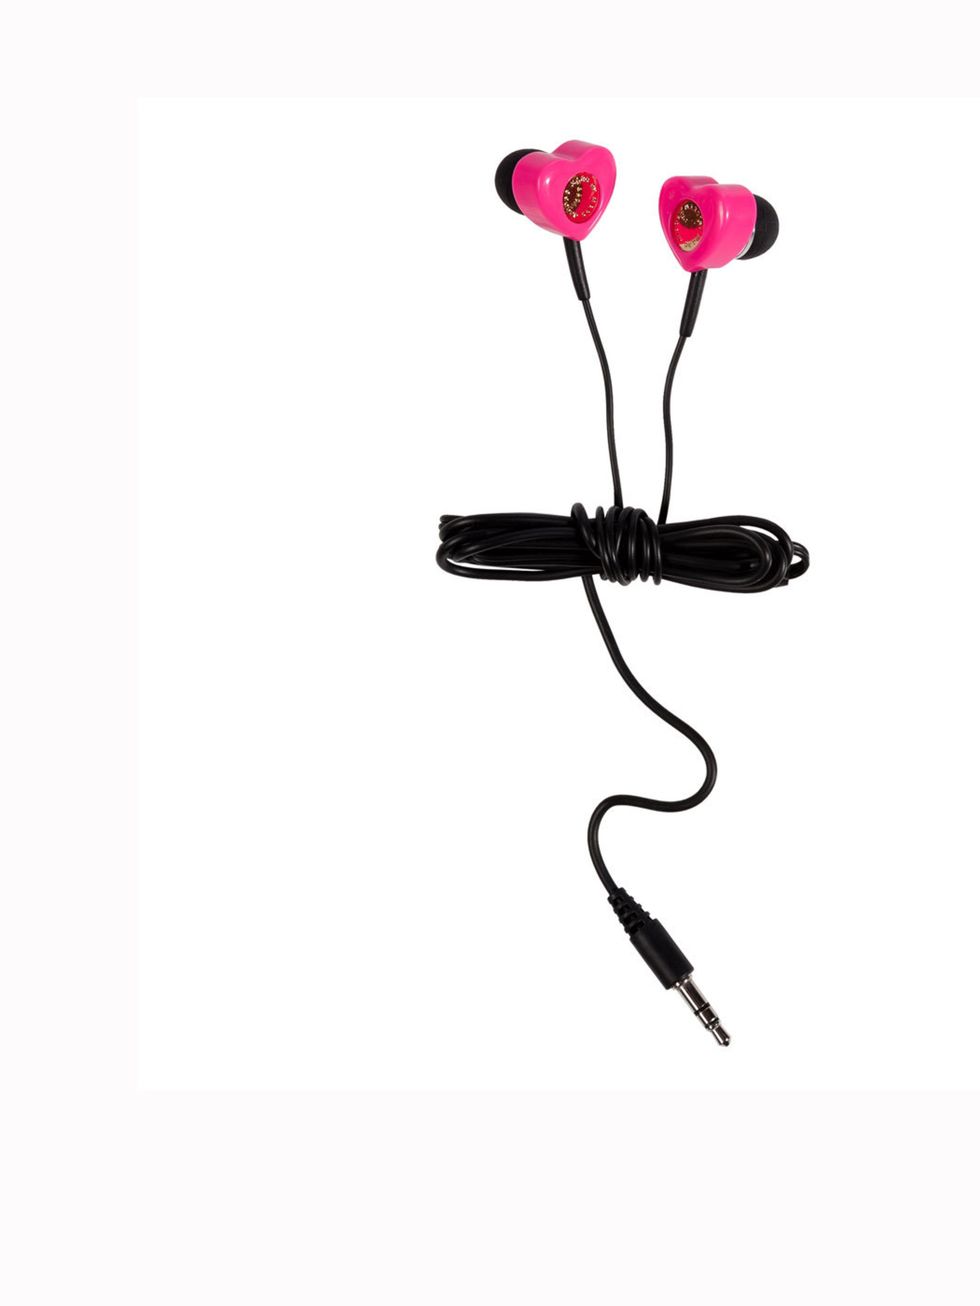 <p>Very girlie and cute, and we love them. Marc by Marc Jacobs earbuds, £35, at <a href="http://www.stylebop.com/uk/product_details.php?id=384271">Stylebop.com</a></p>